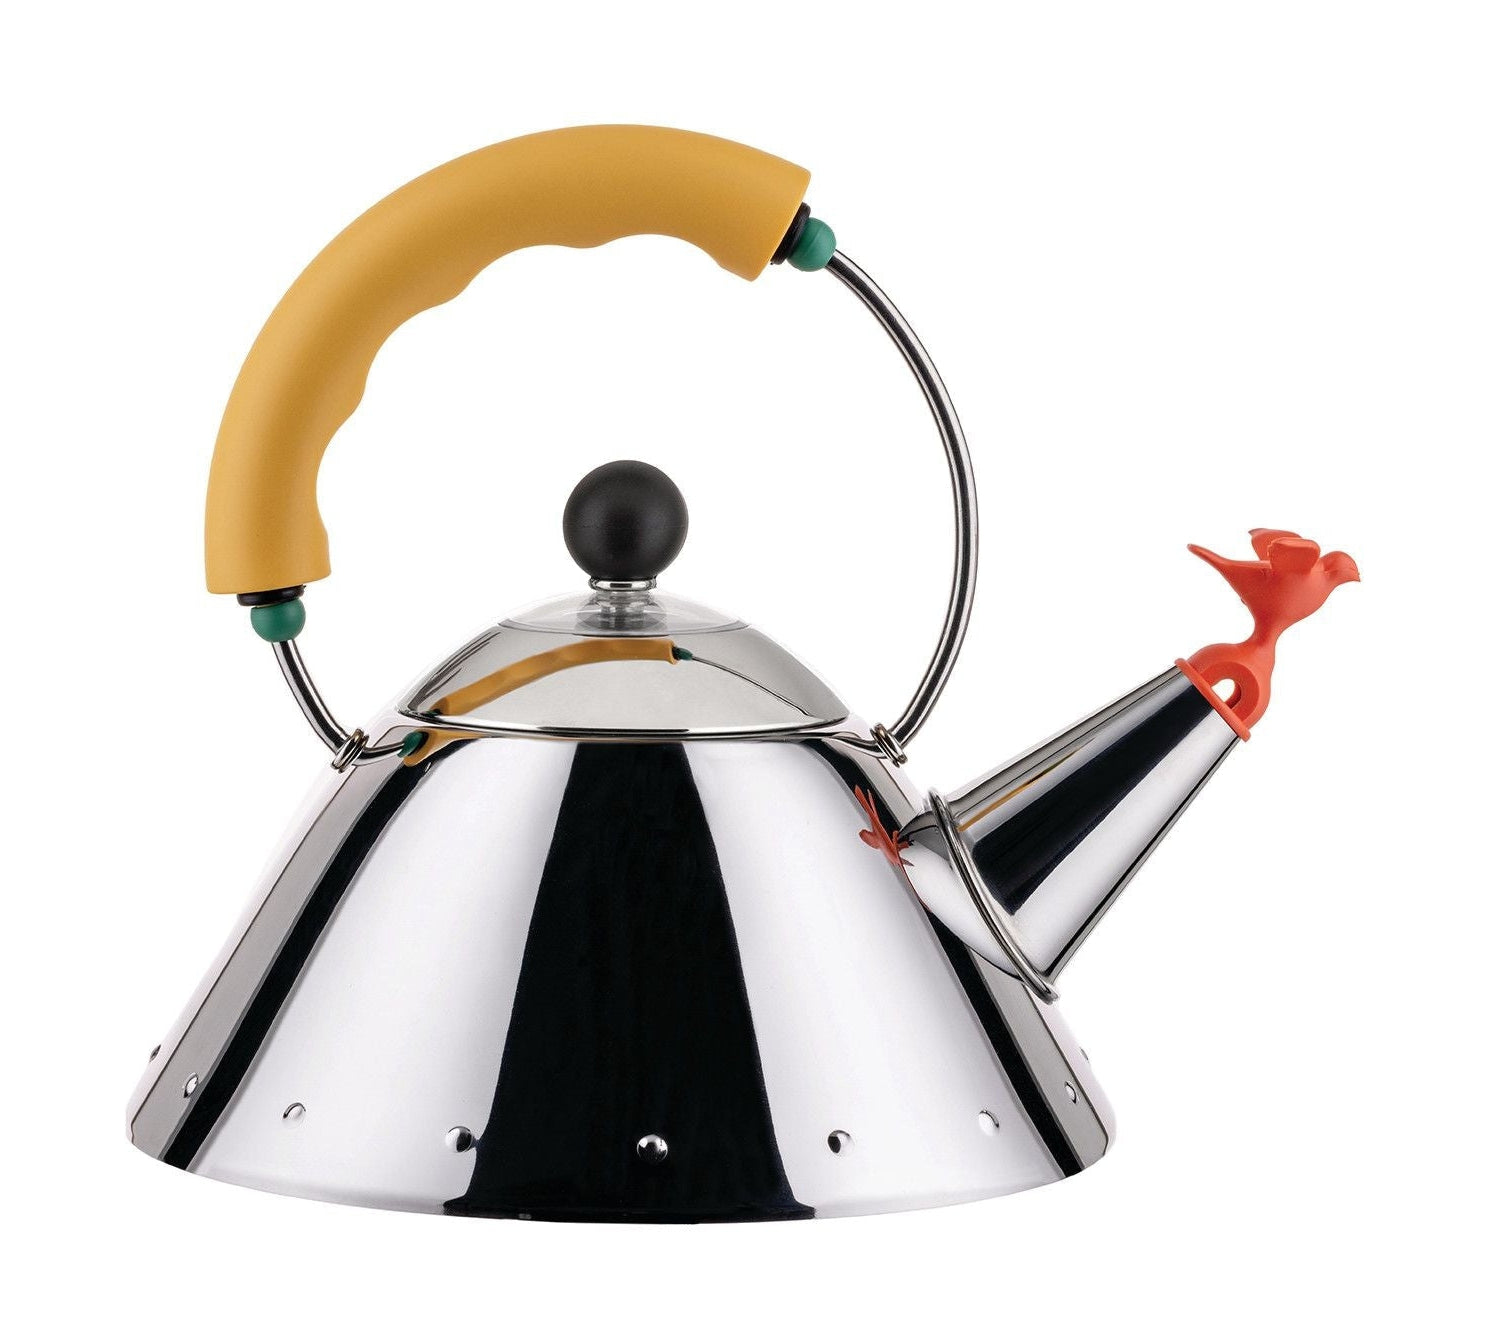 Alessi 9093 Kettle 1 L, Yellow